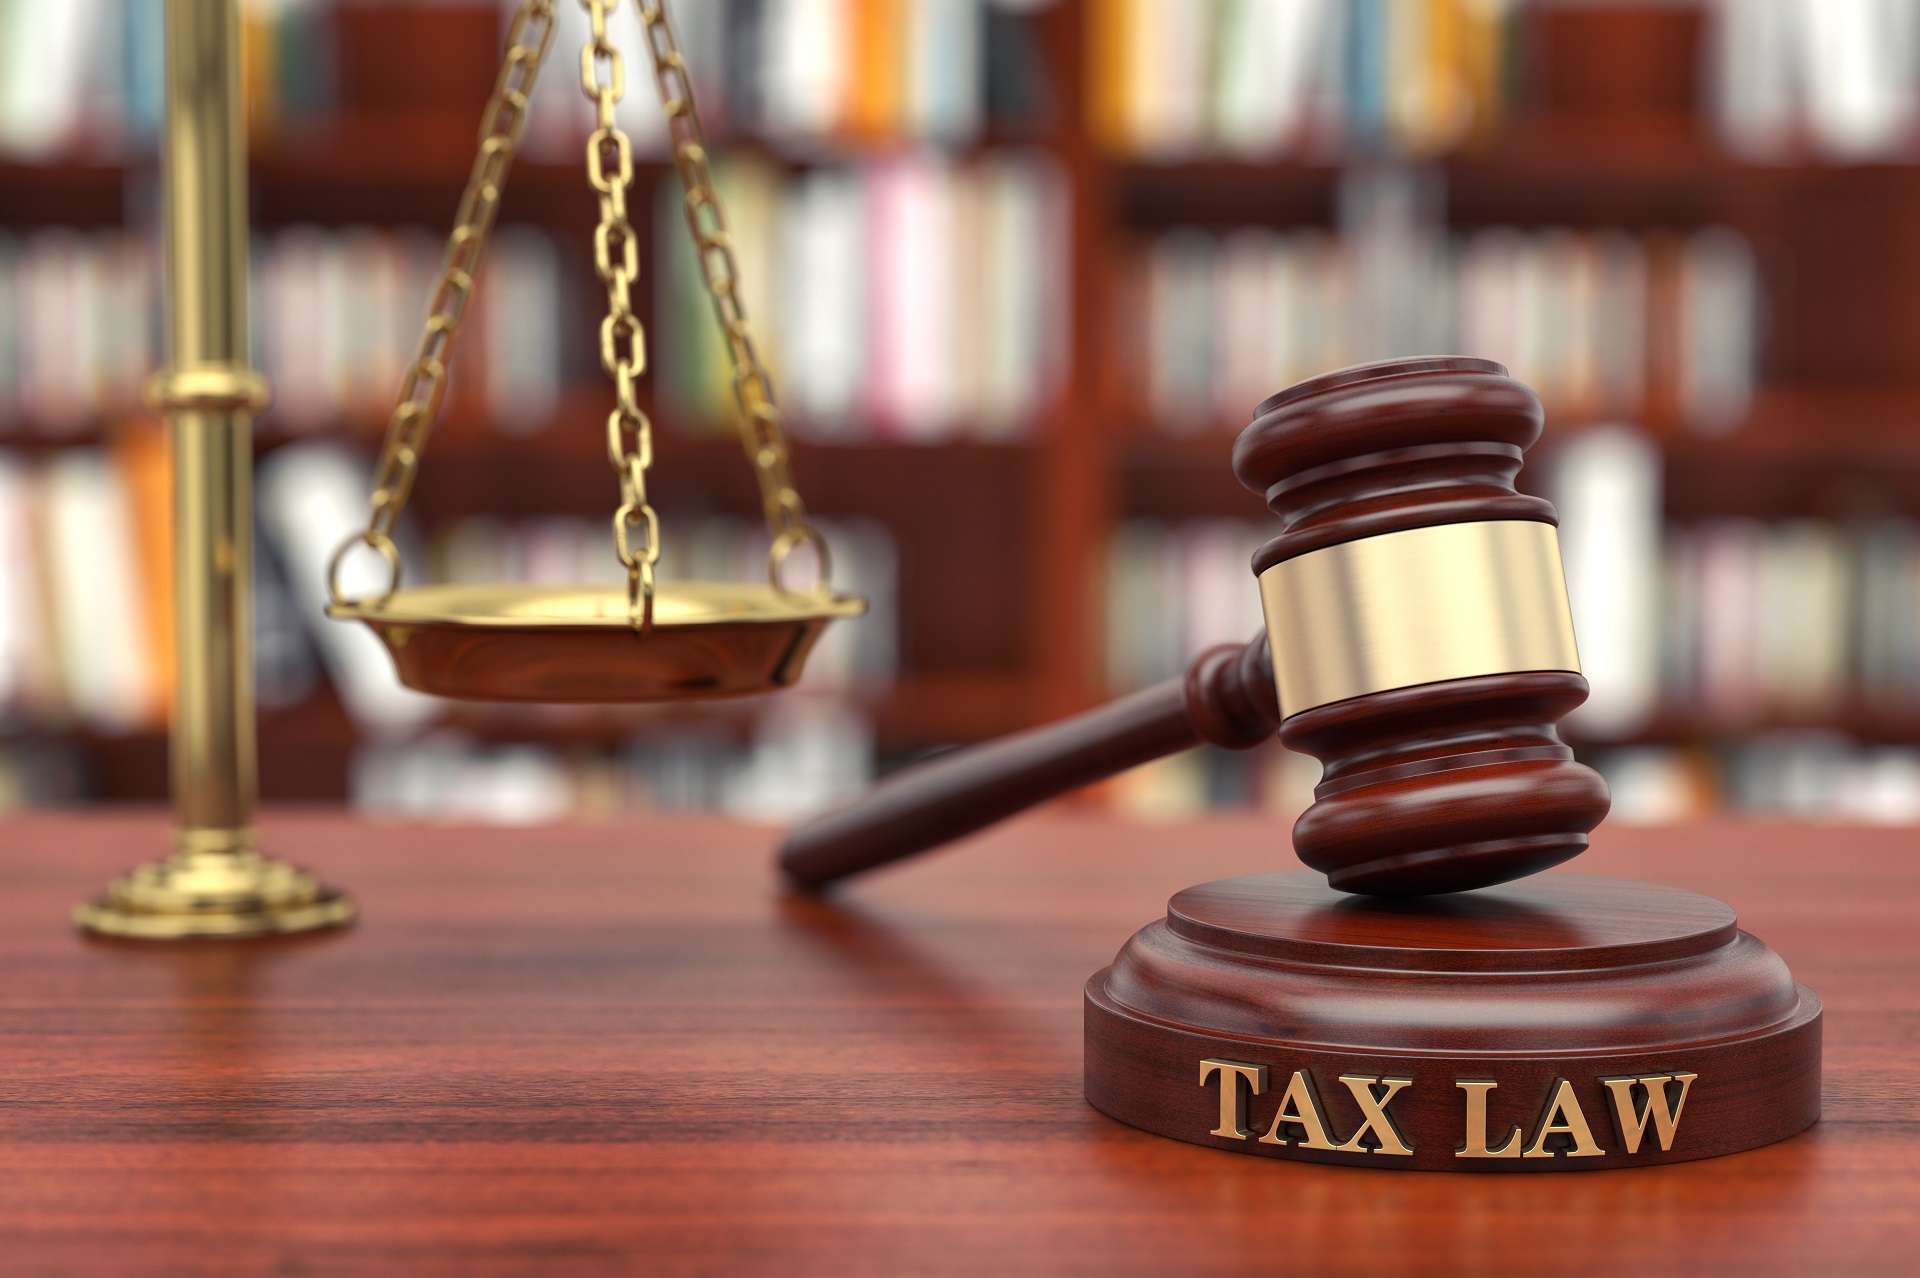 Are You Looking For Best Tax Lawyer Canada